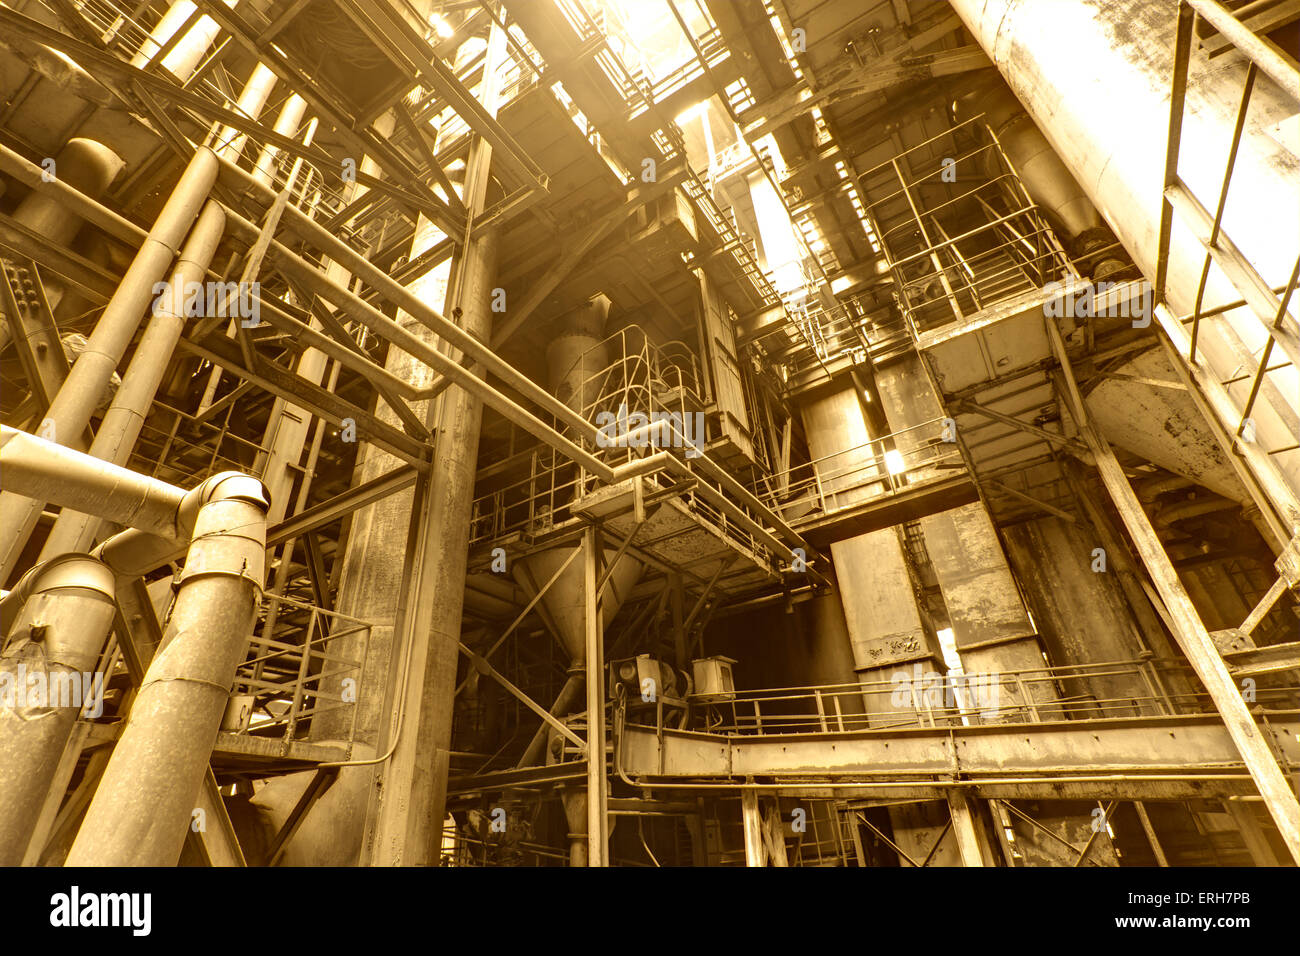 Interior of steel mill with pipes and valves Stock Photo